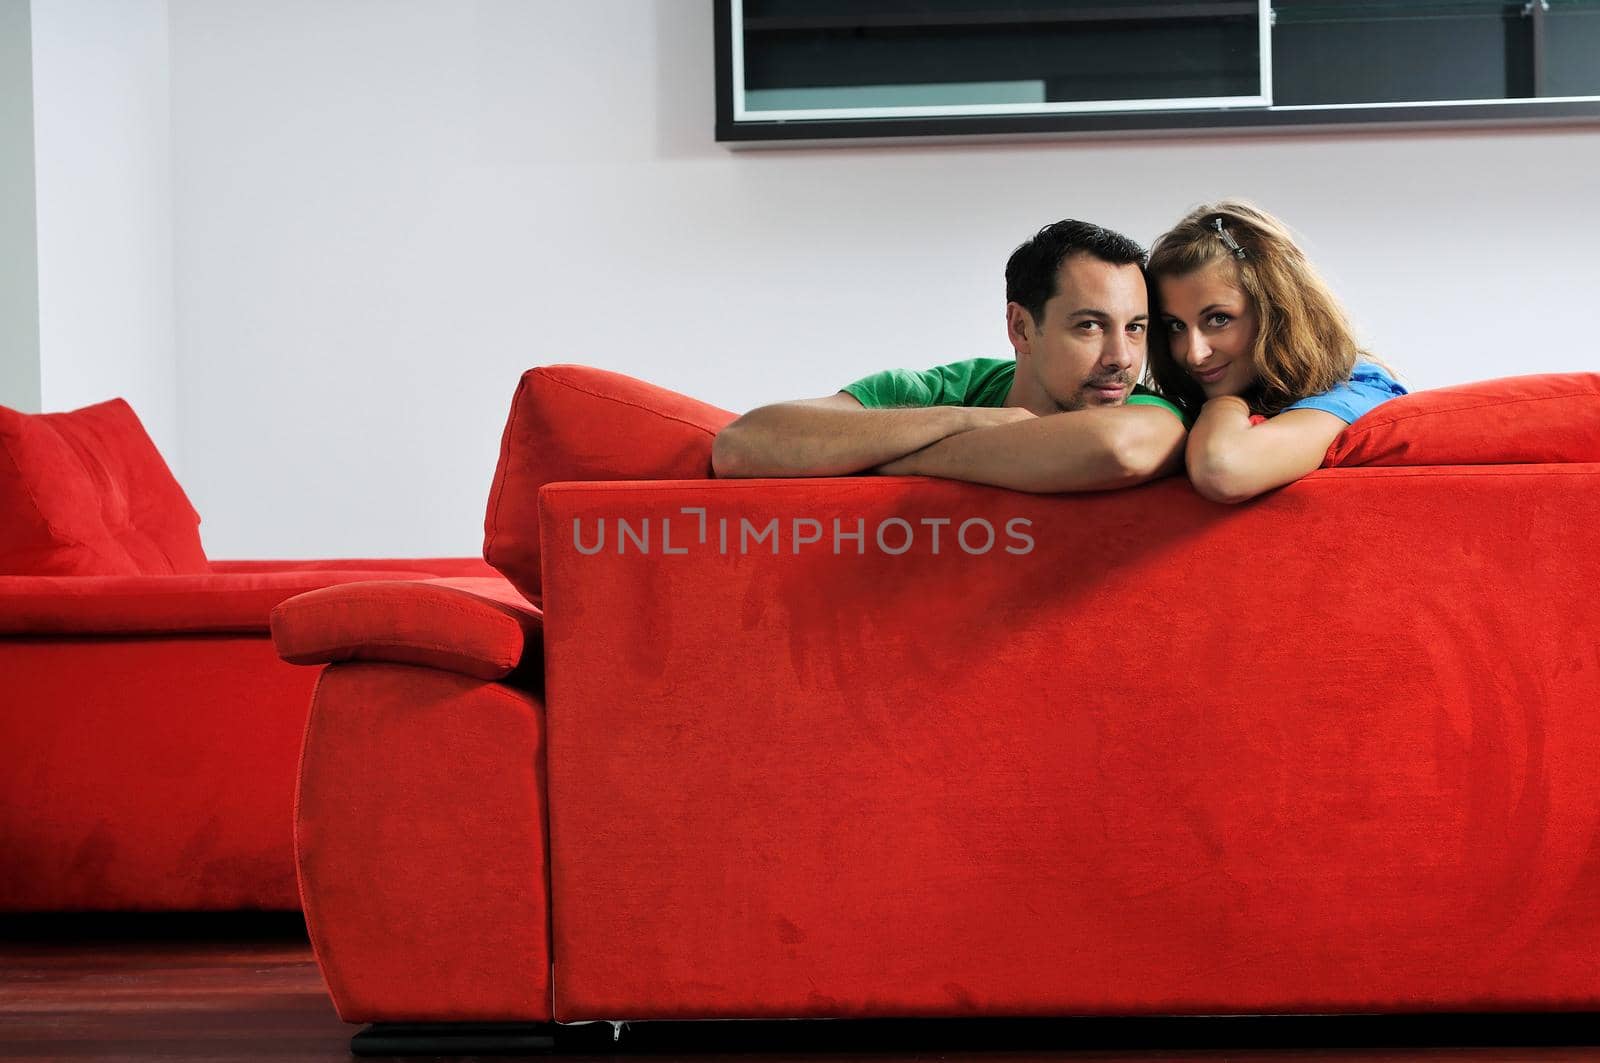 happy couple relaxing on red sofa in big bright new apartment